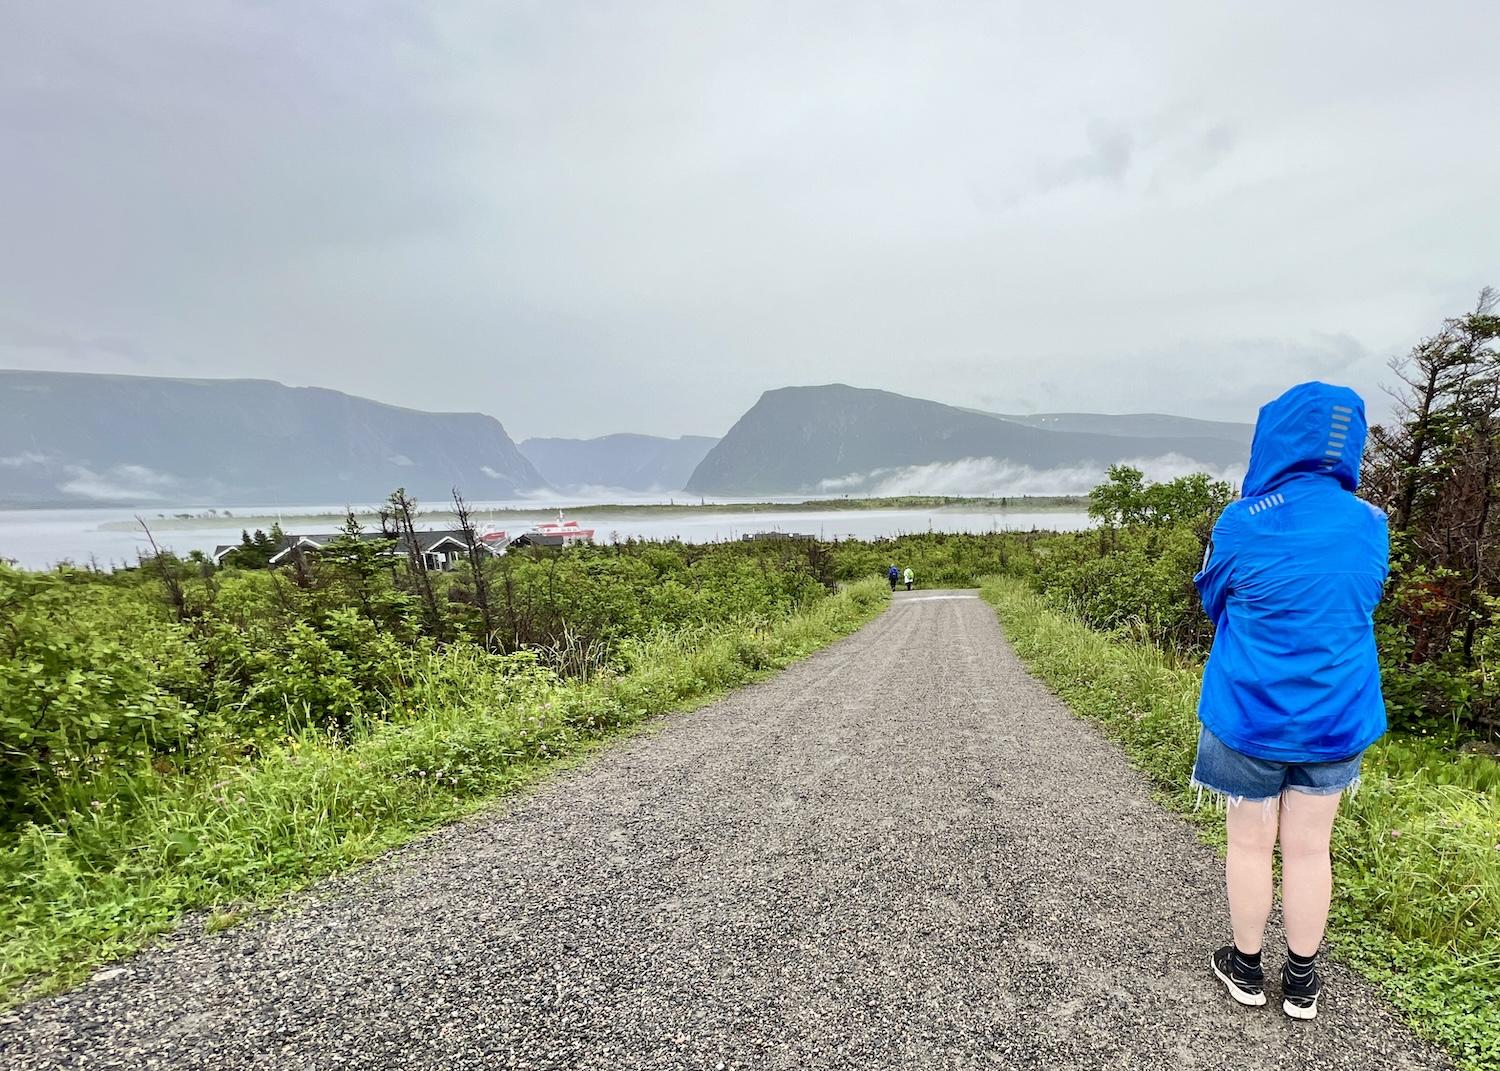 Walking Western Brook Pond Trail, you will eventually see the landlocked freshwater fjord and the dock area where BonTours operates its boat trips.